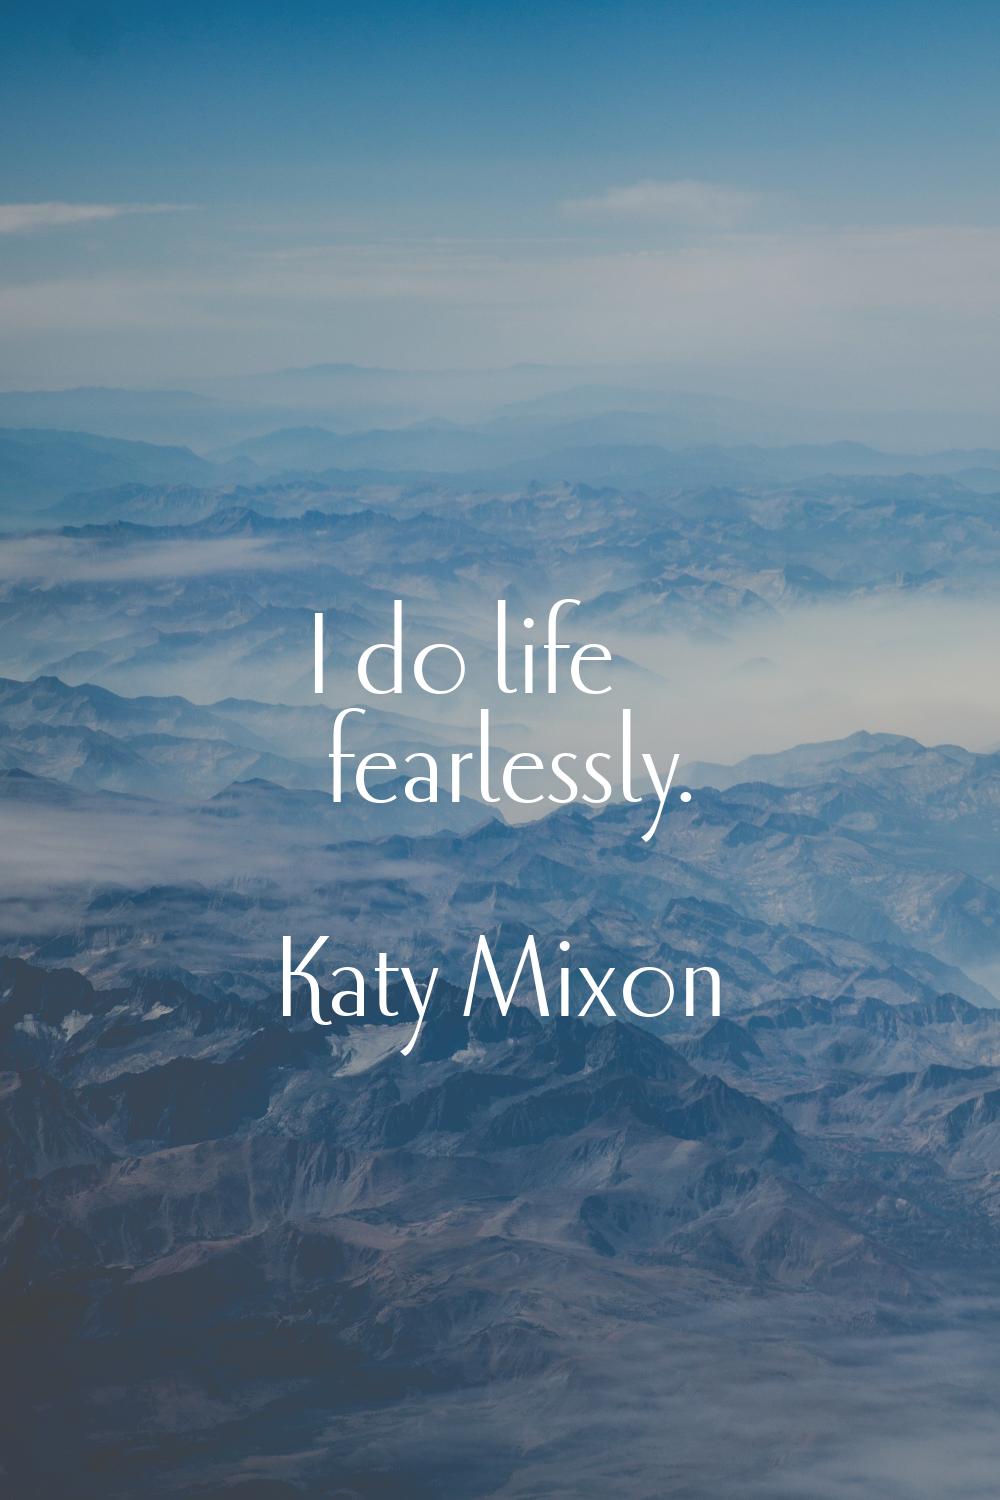 I do life fearlessly.